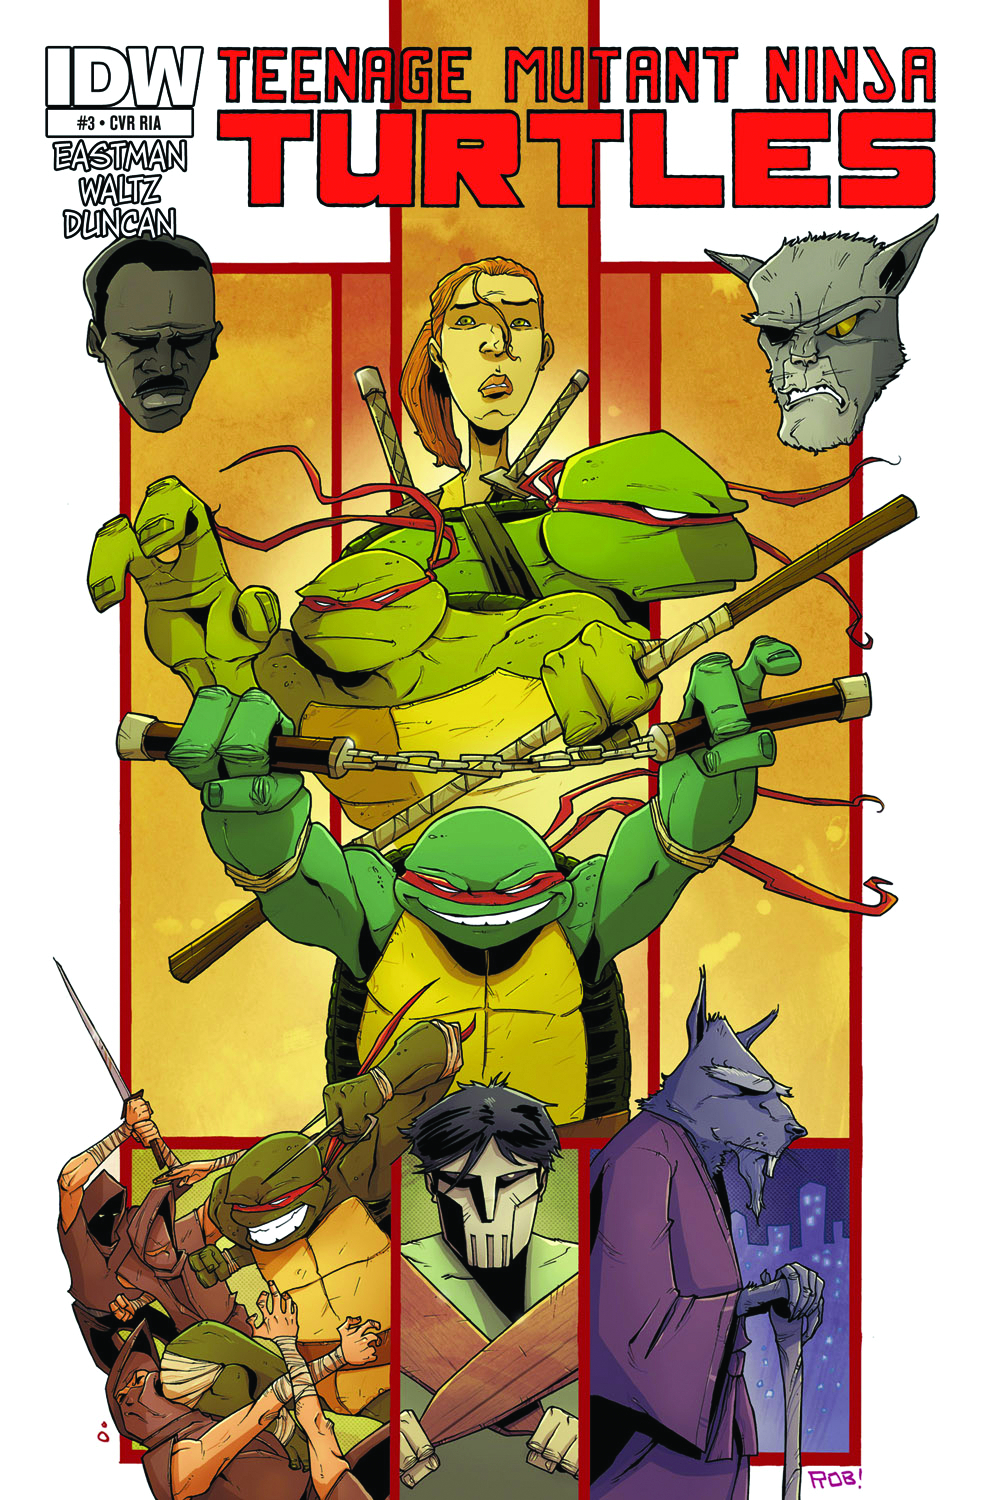 TMNT ONGOING #6